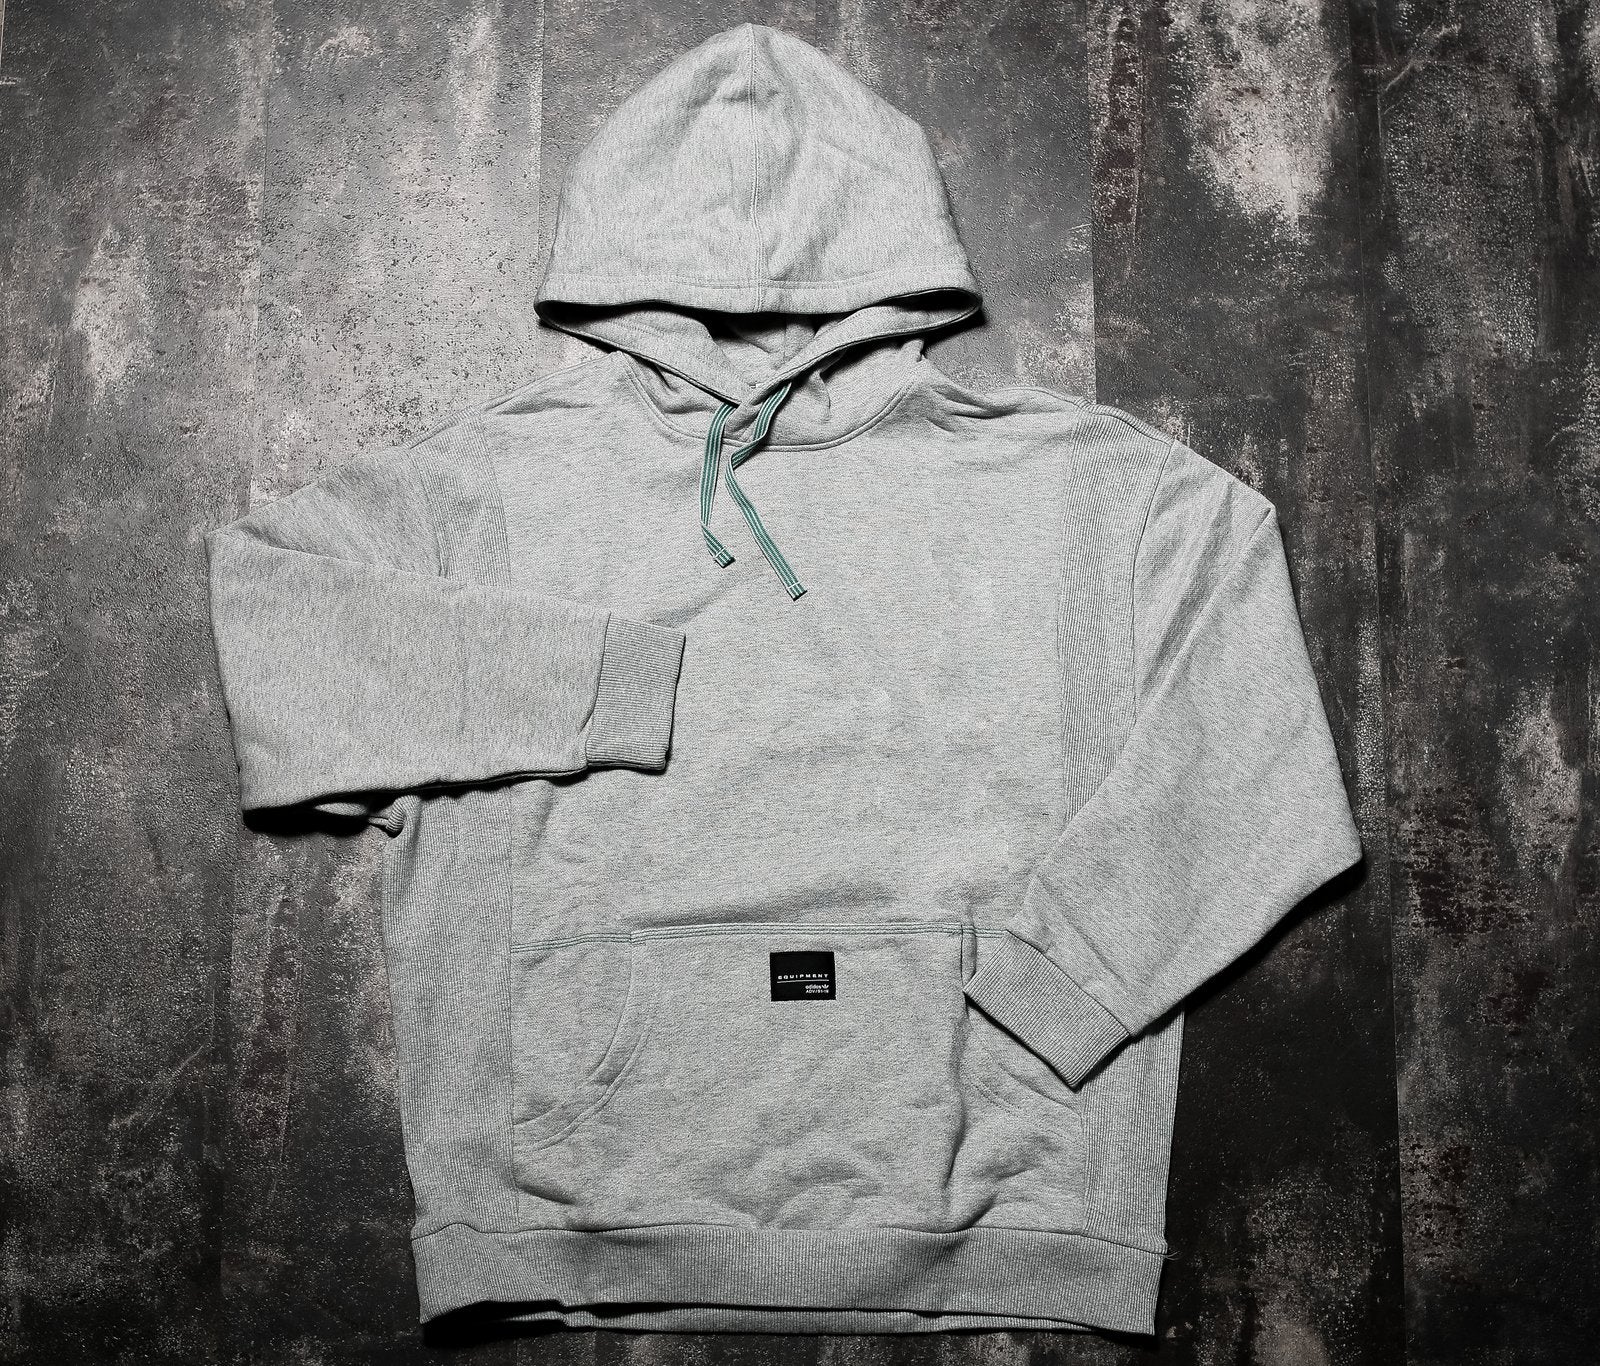 ADIDAS EQT 18 HOODIE - Oneness Boutique